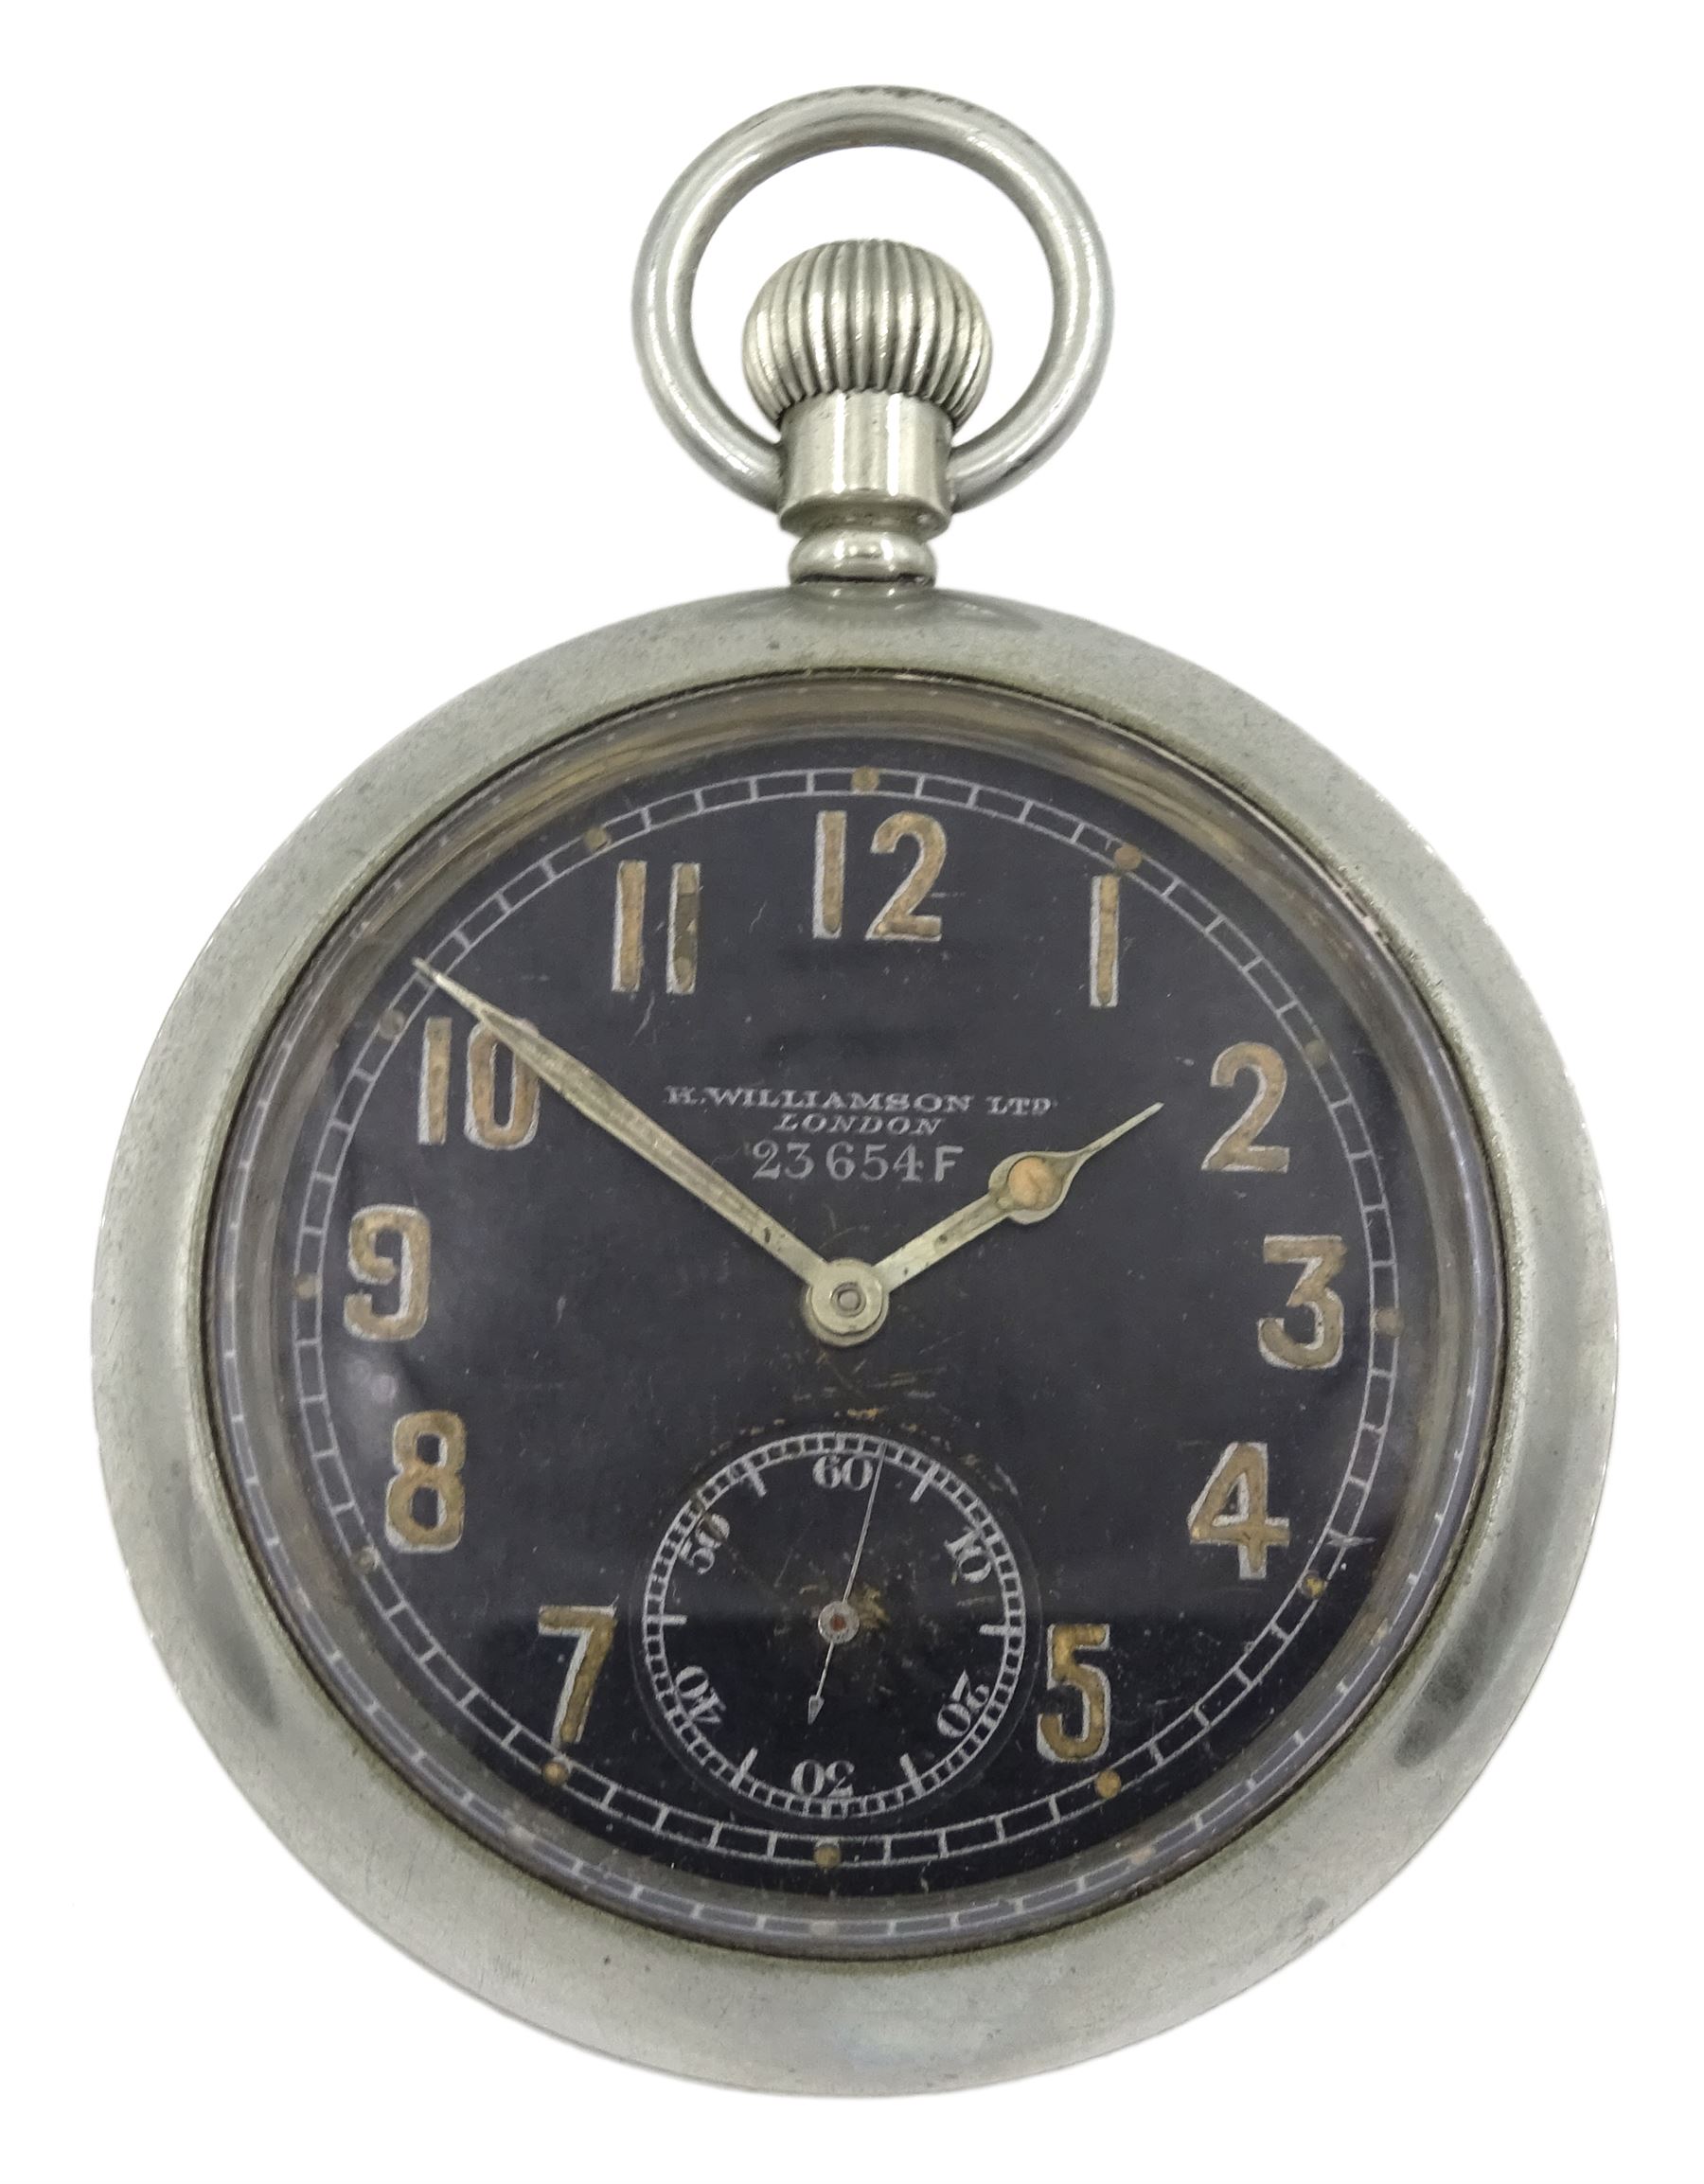 WWI British Military nickle open face keyless lever pocket watch by H. Williamson